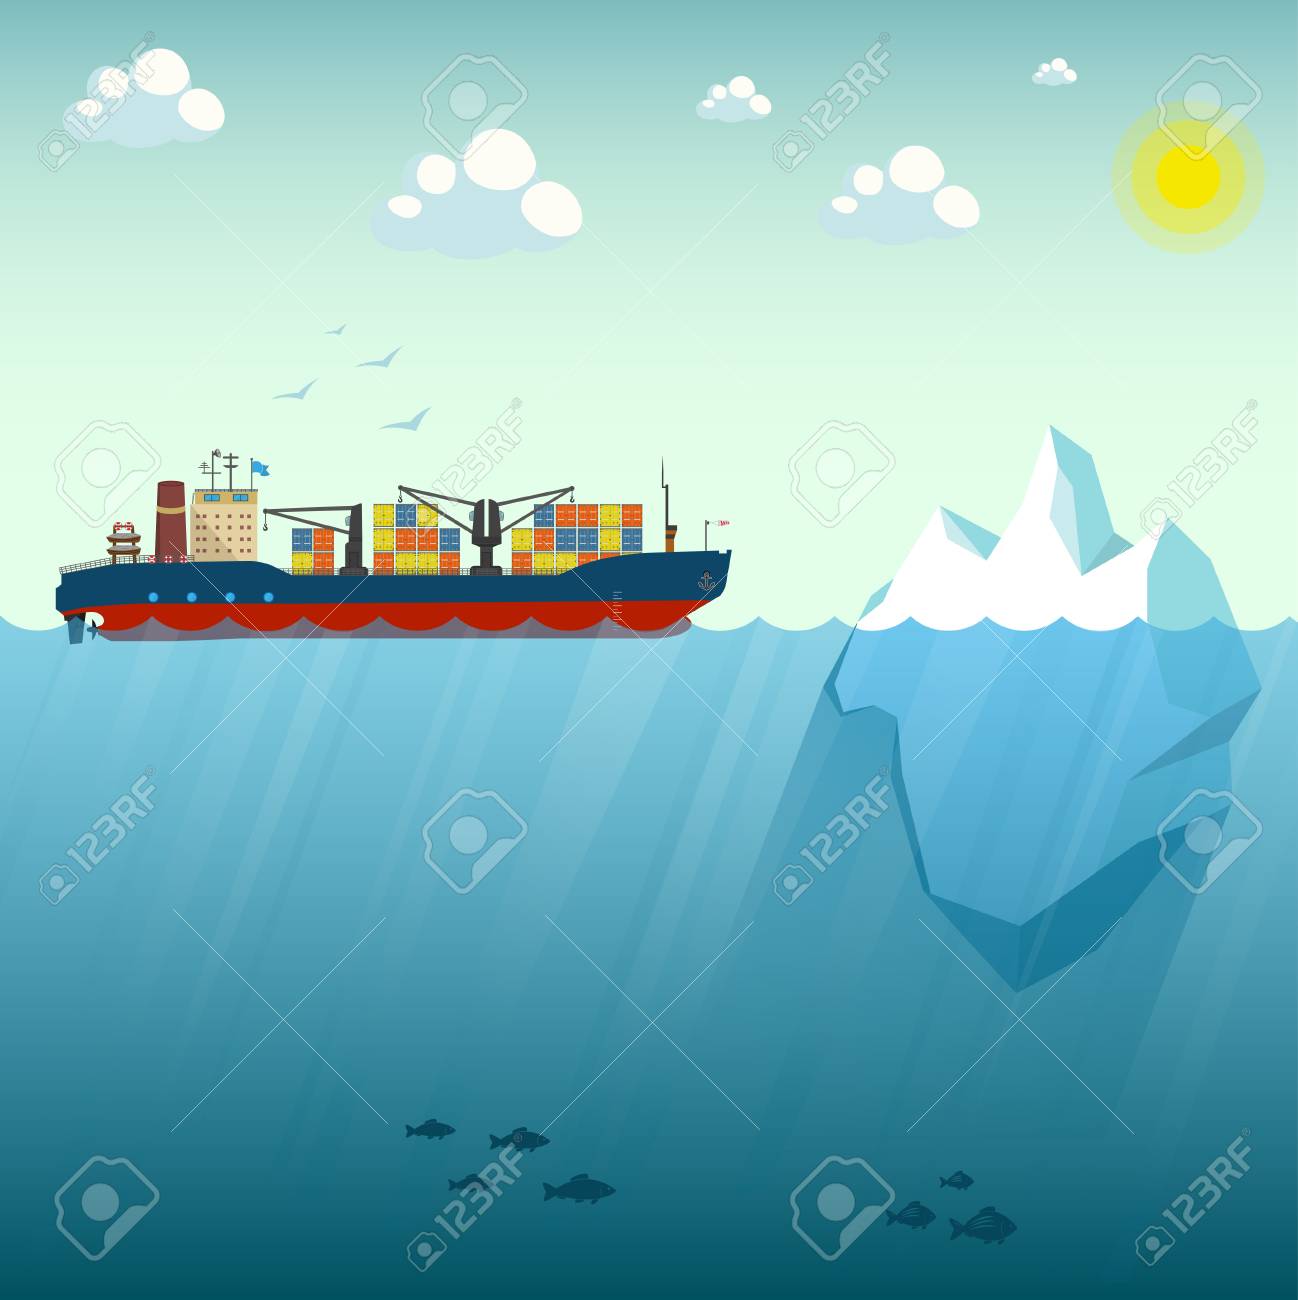 Container Ship Near The Iceberg Vector Illustration On